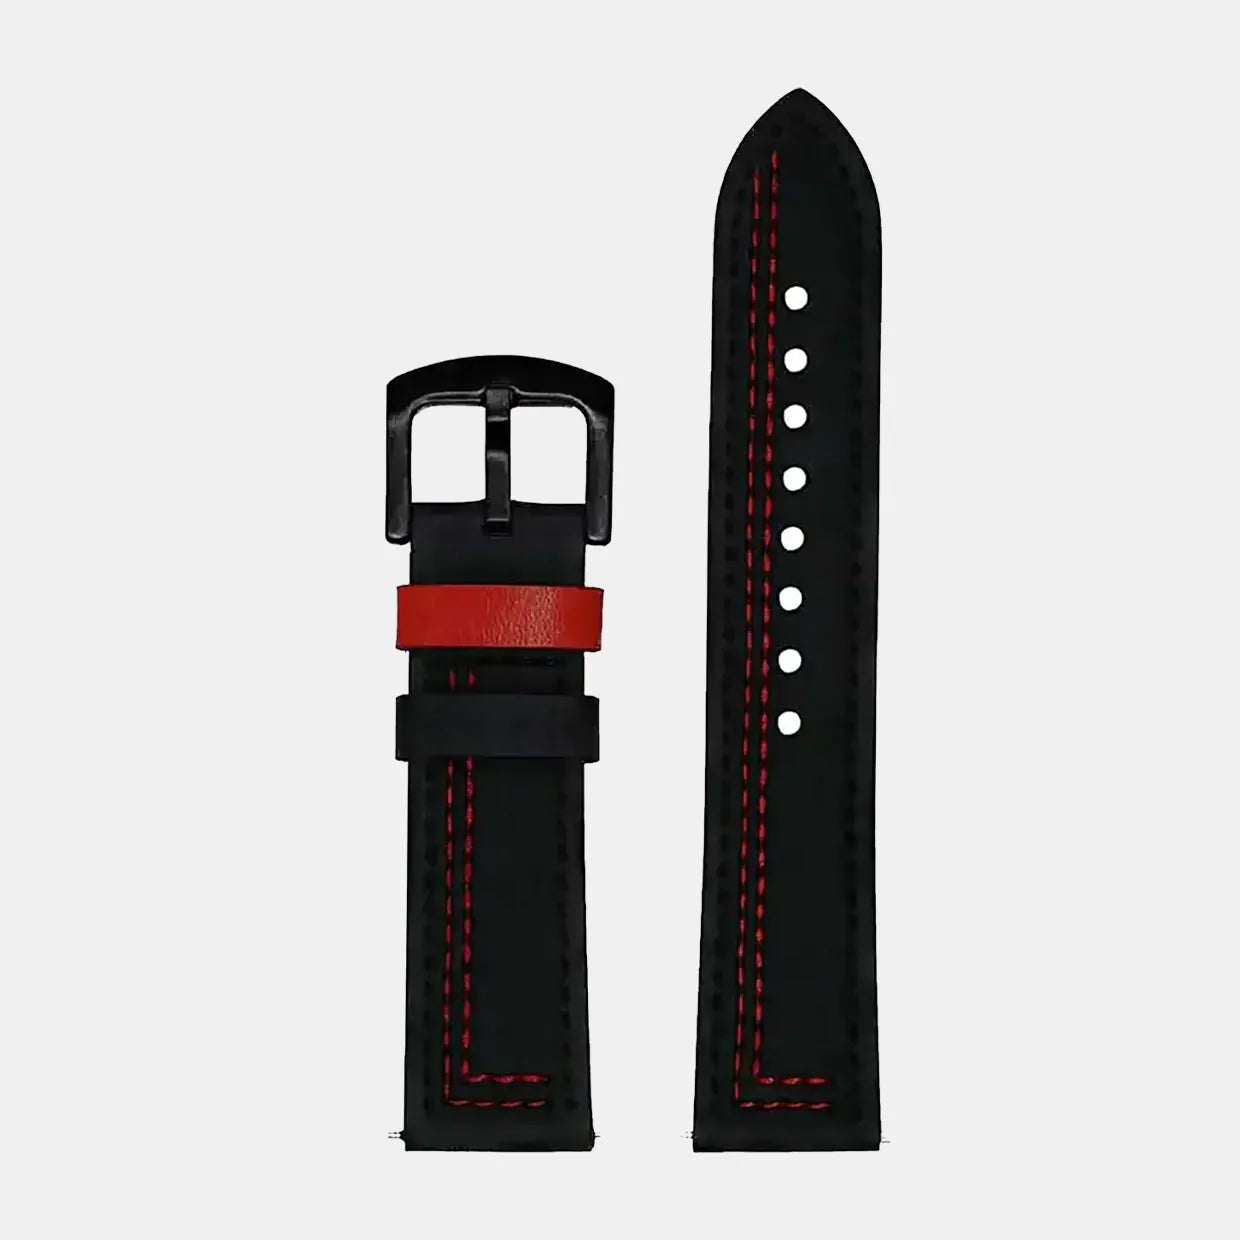 Unveil our Leather Bracelet in Striking Black-Red, a superb complement to our rim-inspired watches. Crafted by a German startup, our cutting-edge design resonates with motorsport, tuning, and auto aficionados. Elevate your style today!